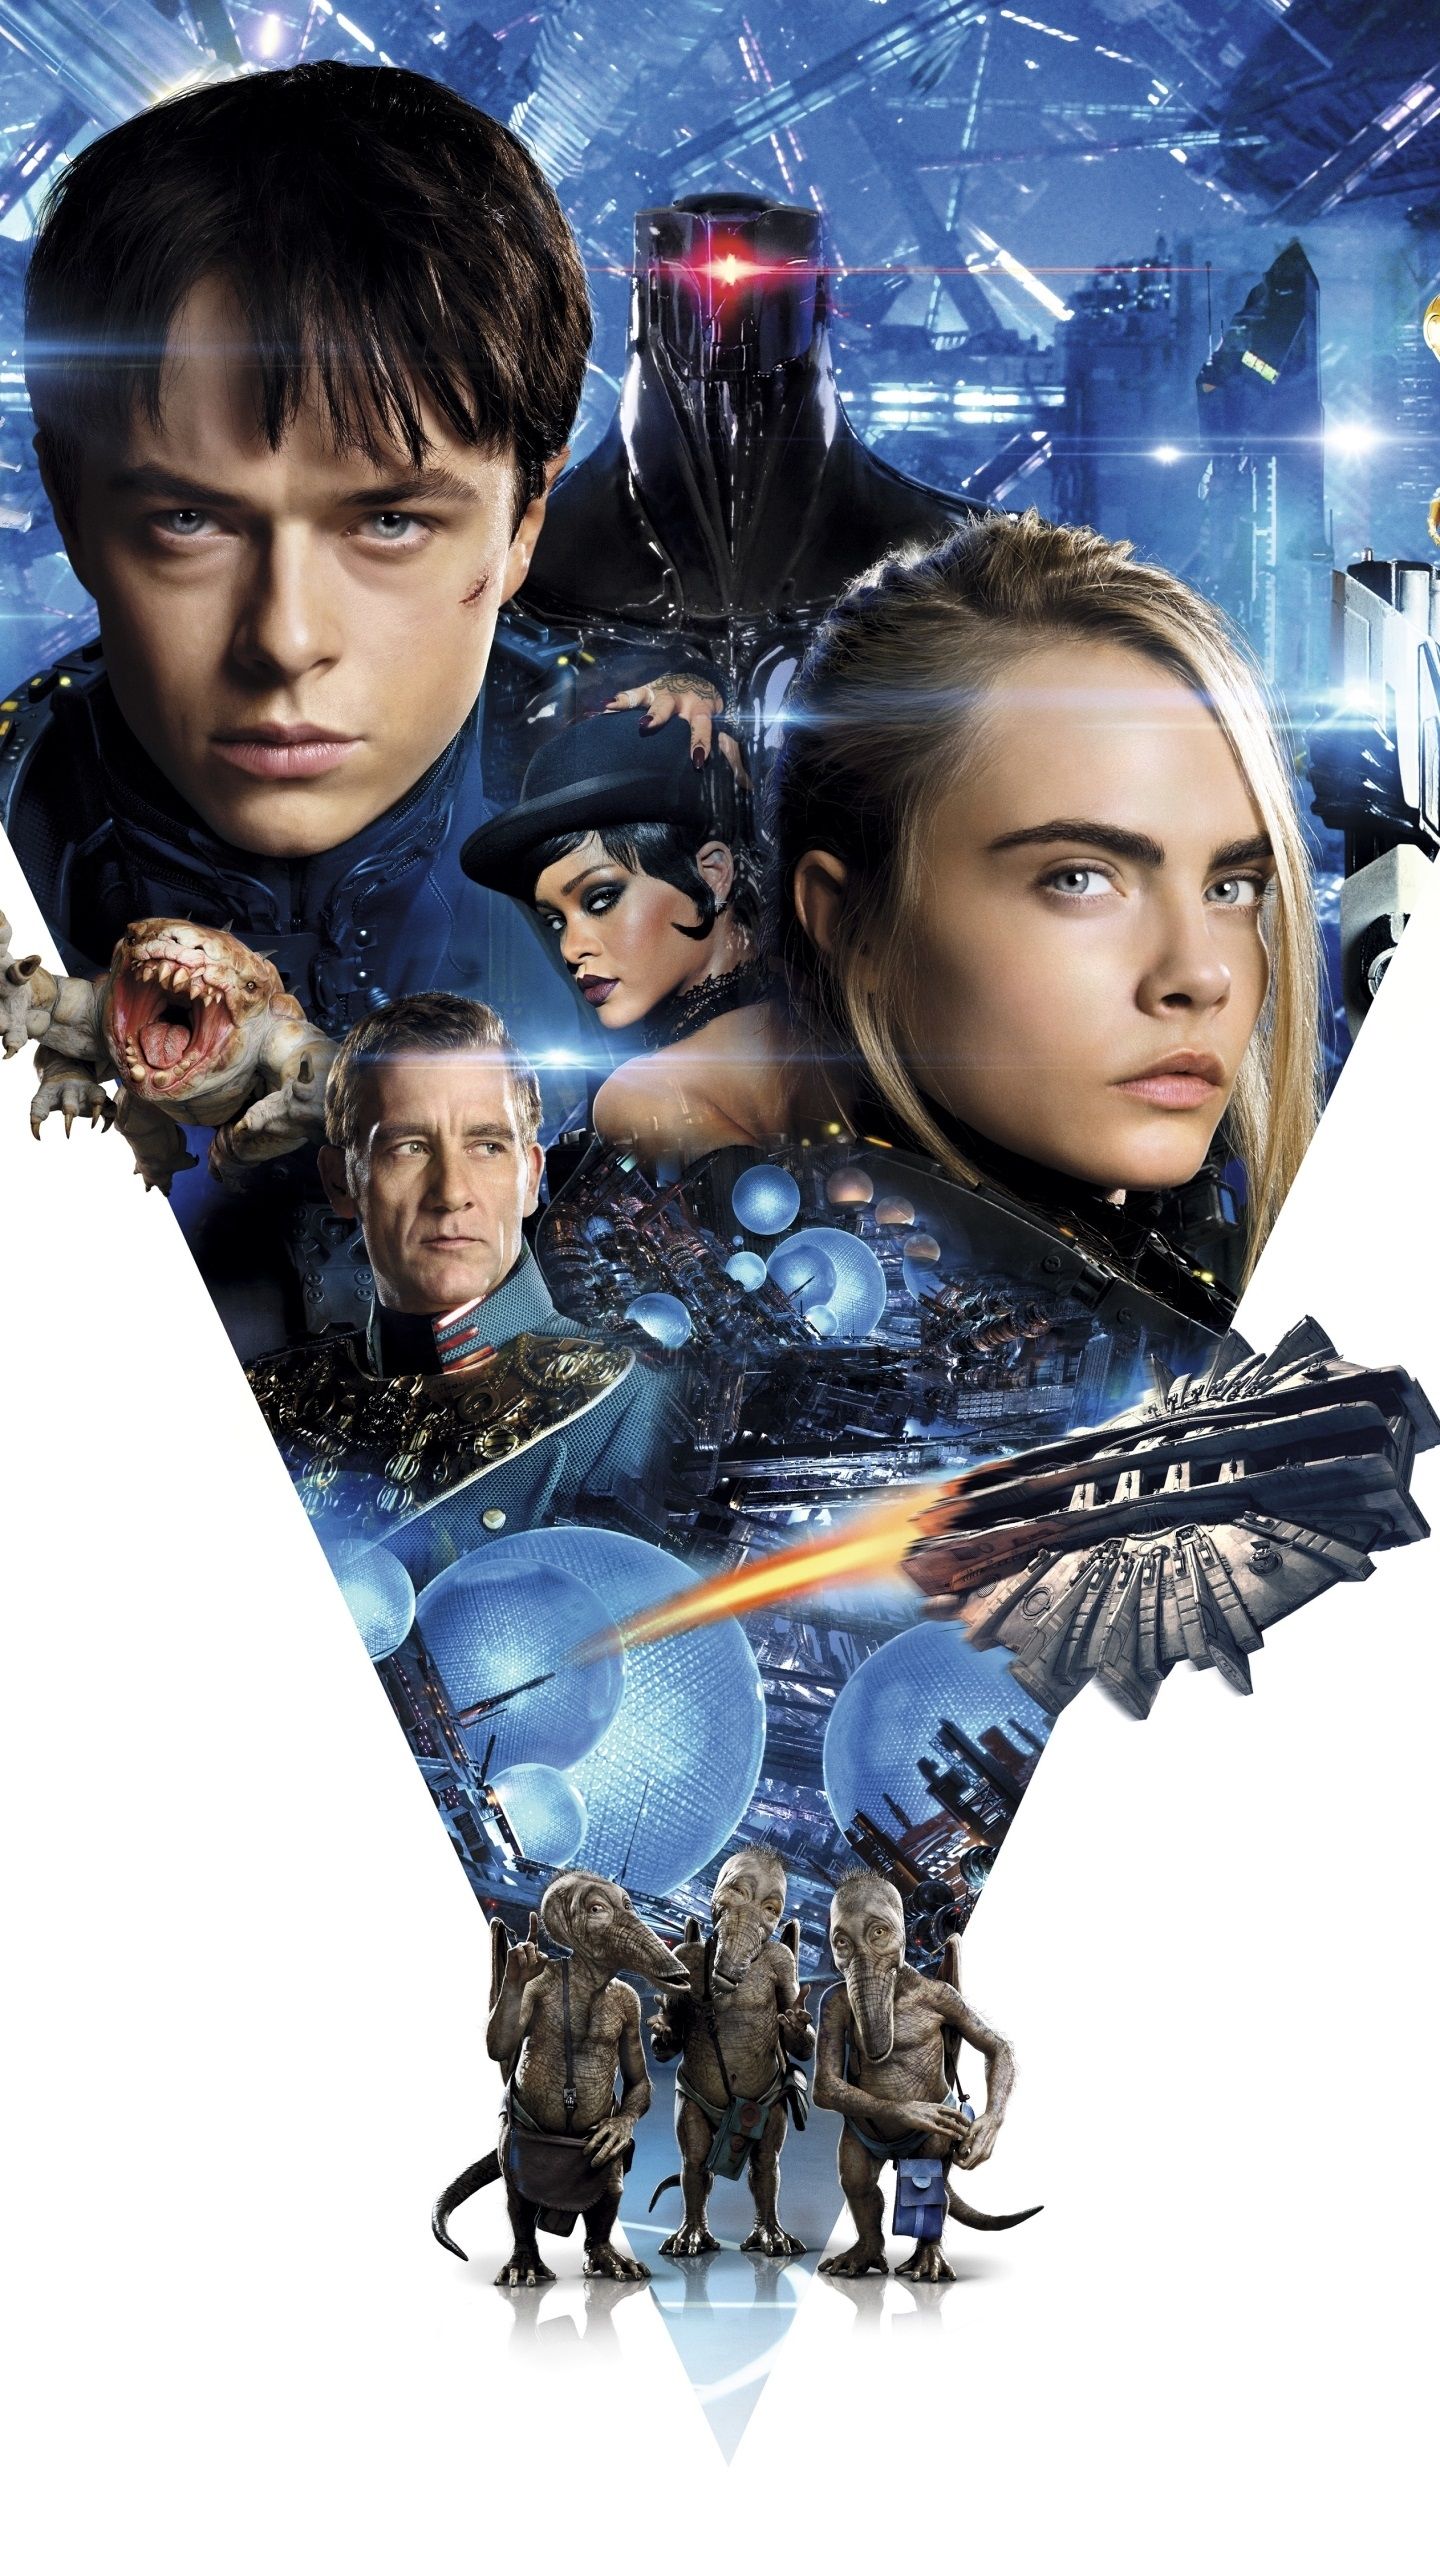 Valerian And The City Of A Thousand Planets Movie Poster 2017 Wallpapers